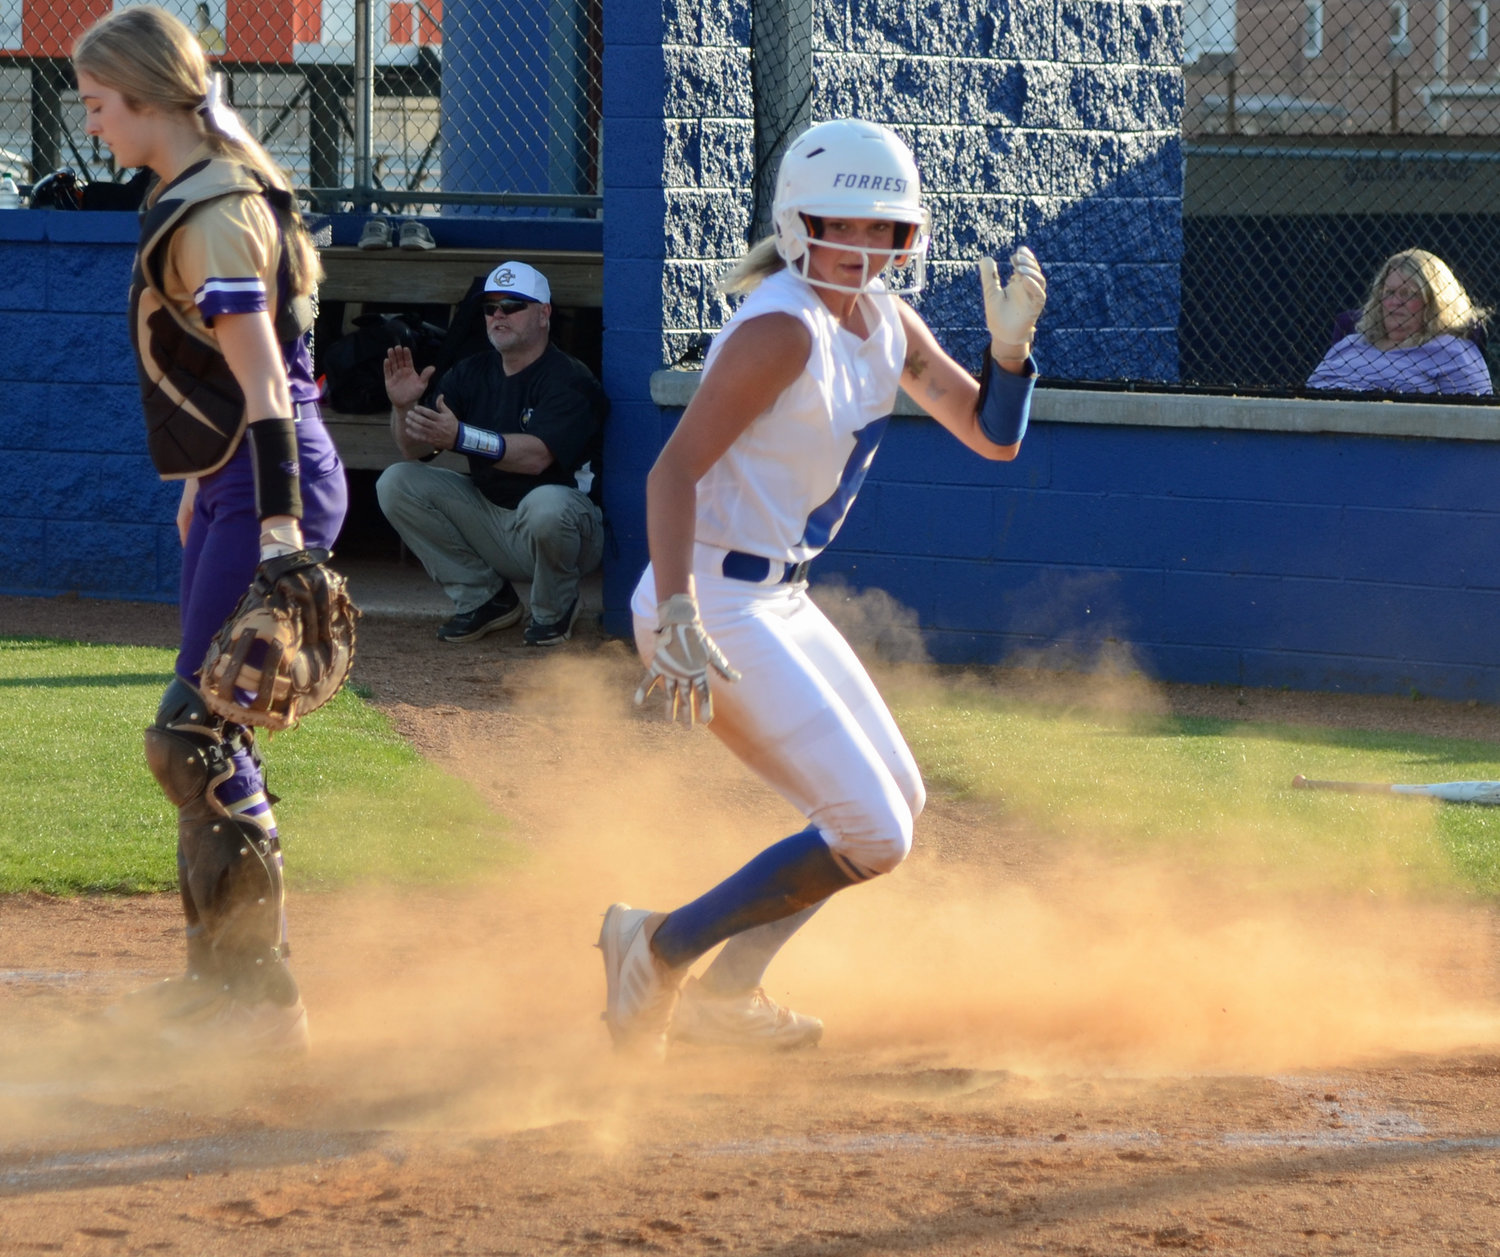 Macyn Kirby, who went 3-for-3, slides home to make it 1-0 in the bottom of the first inning.